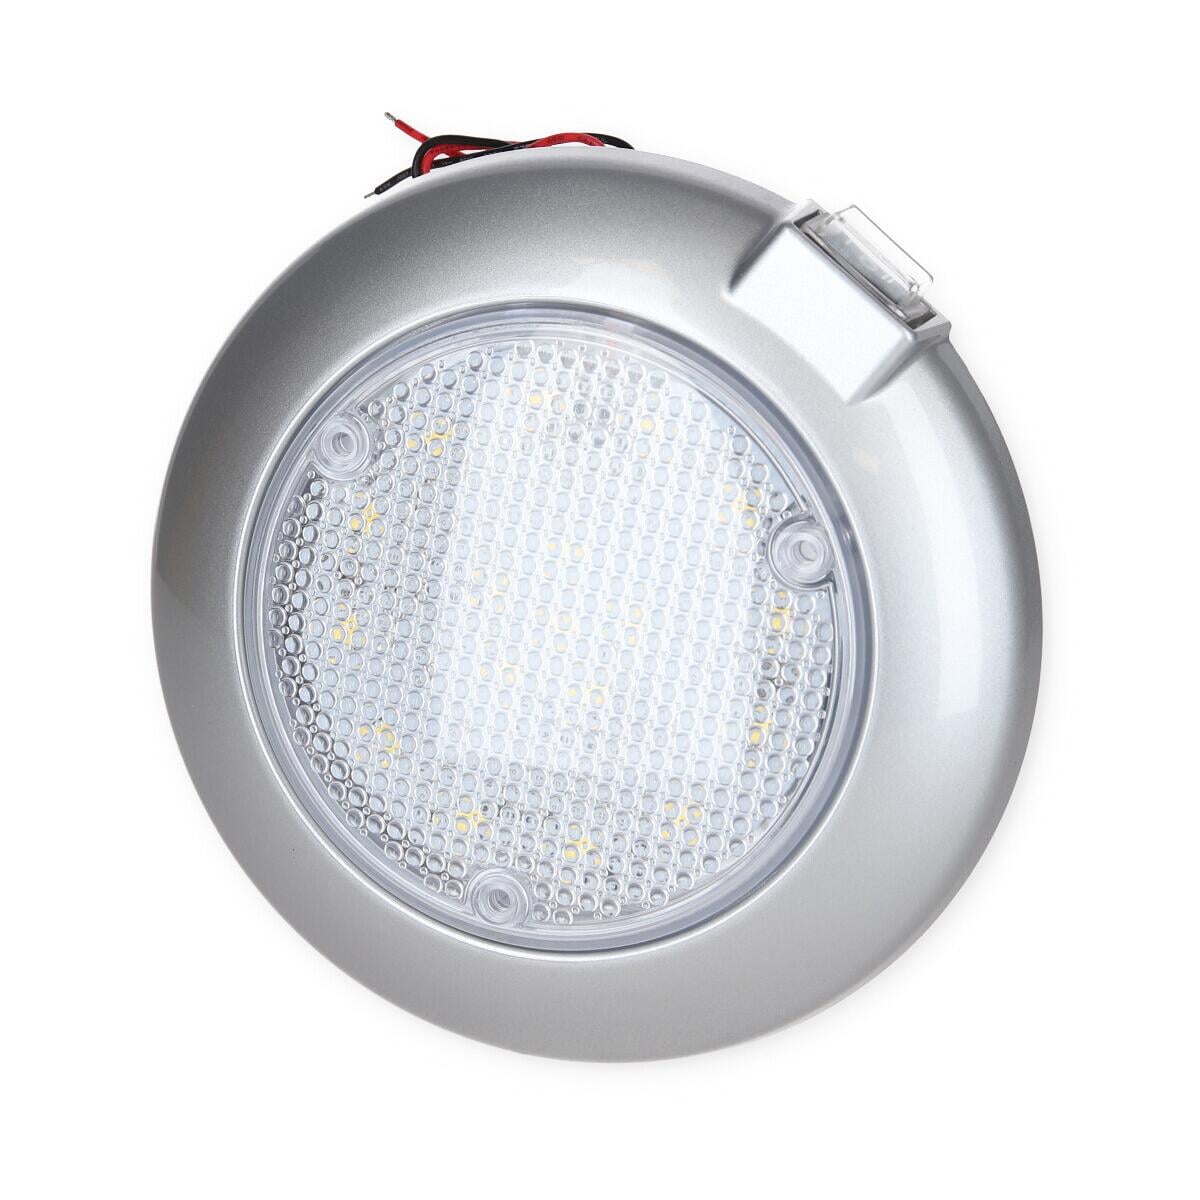 Carbest LED Deckenleuchte, silbergrau, 12V / 3W bei Camping Wagner